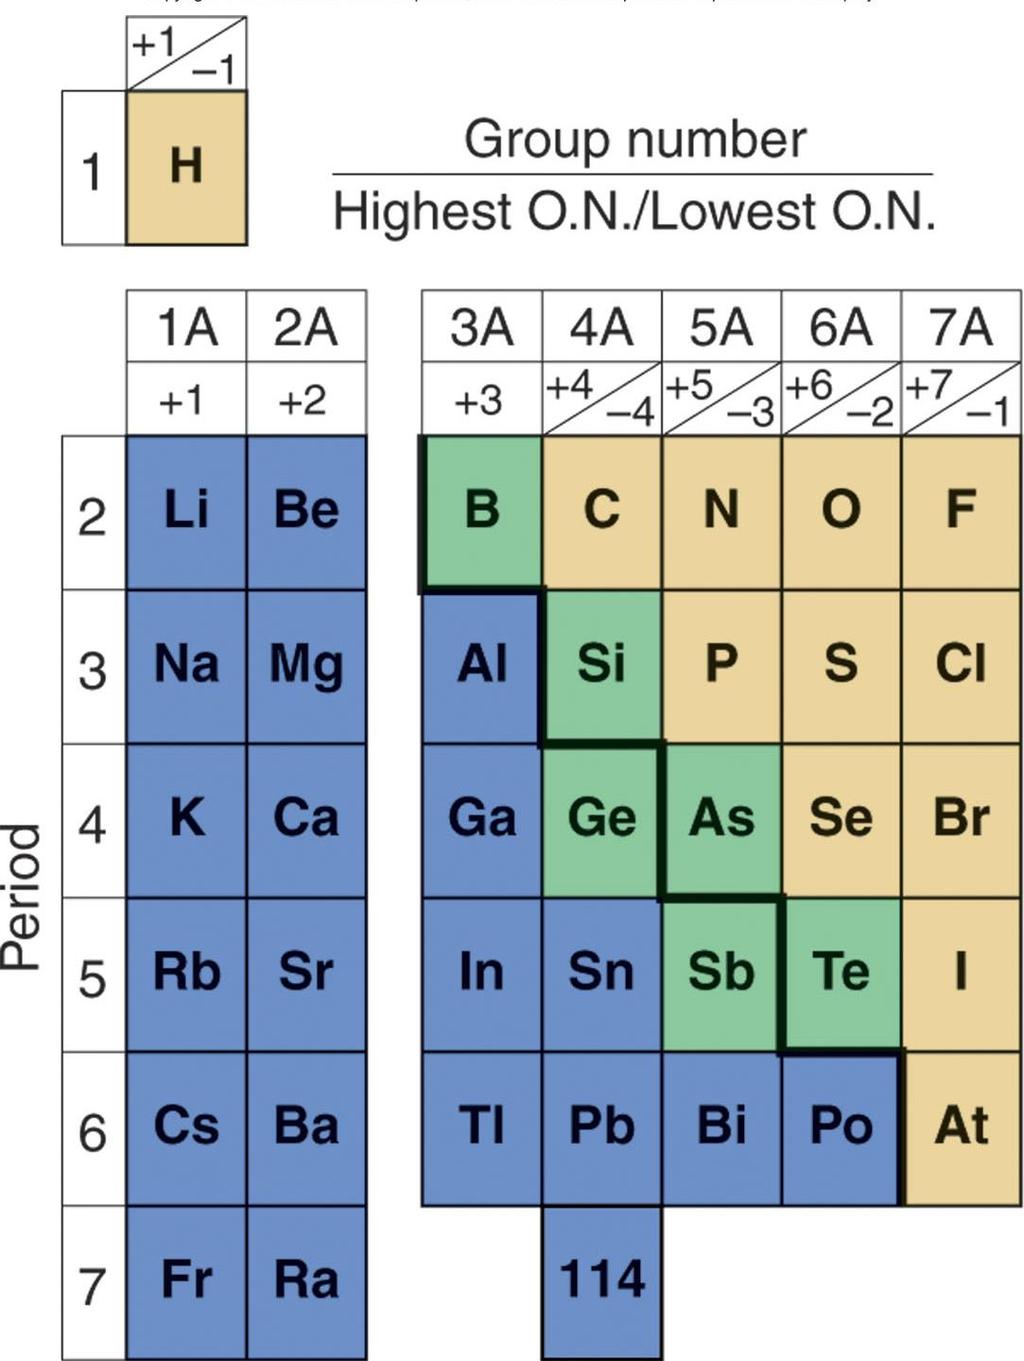 Highest and lowest oxidation numbers of